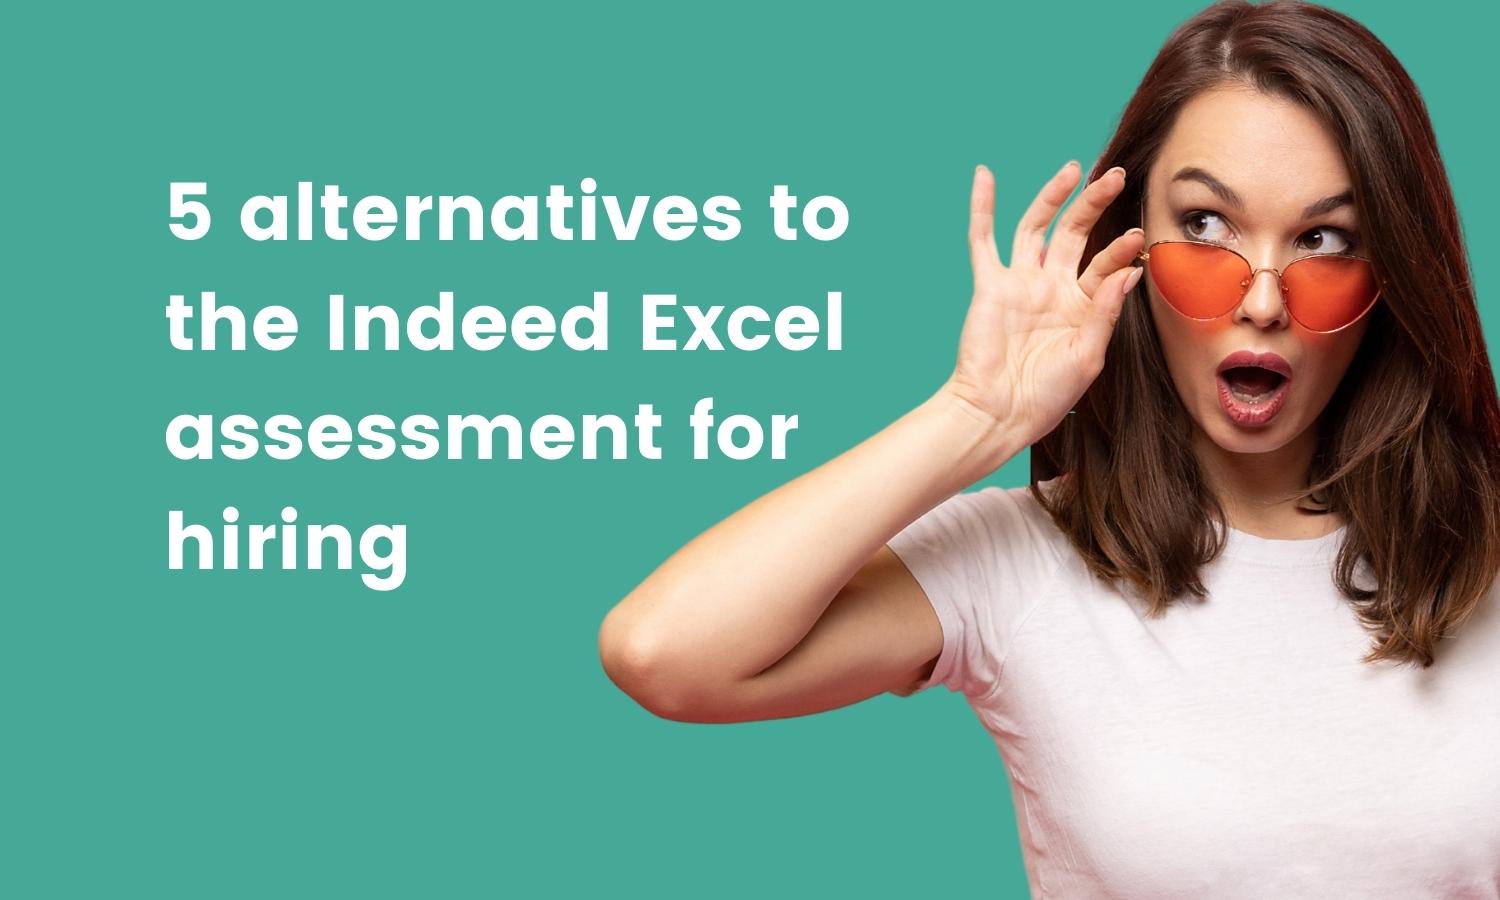 Indeed Excel assessment alternatives feature image